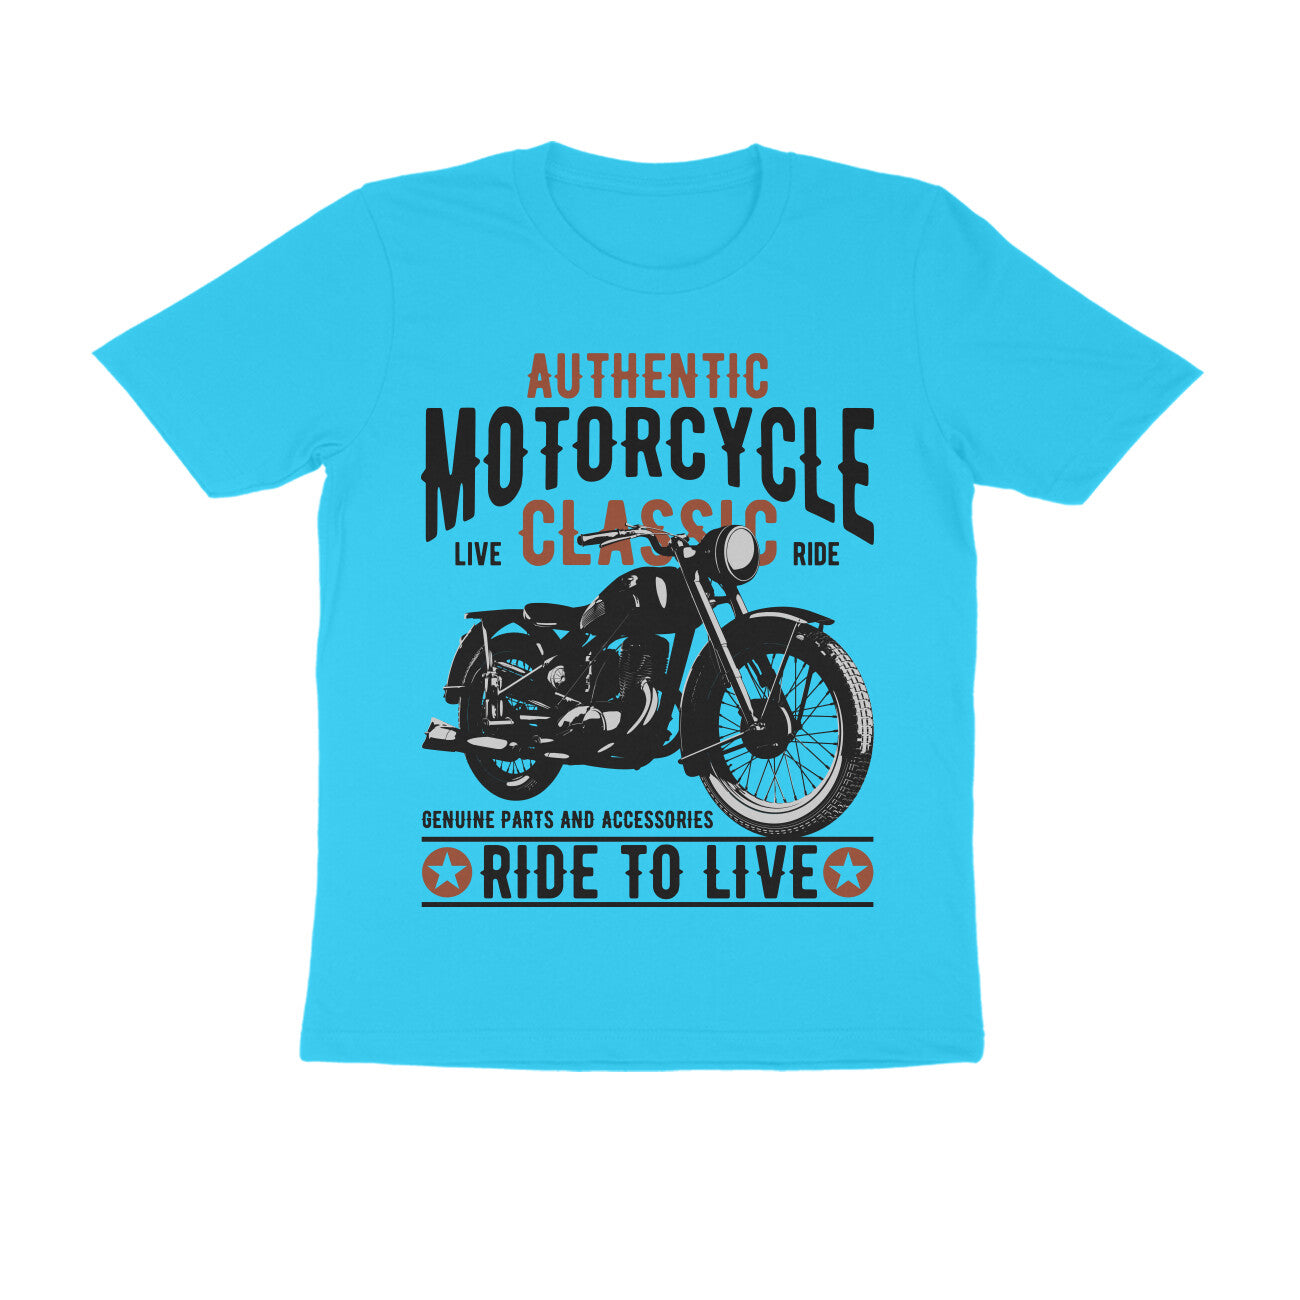 Authentic Classic Motorcycle - Ride to Live T-Shirt